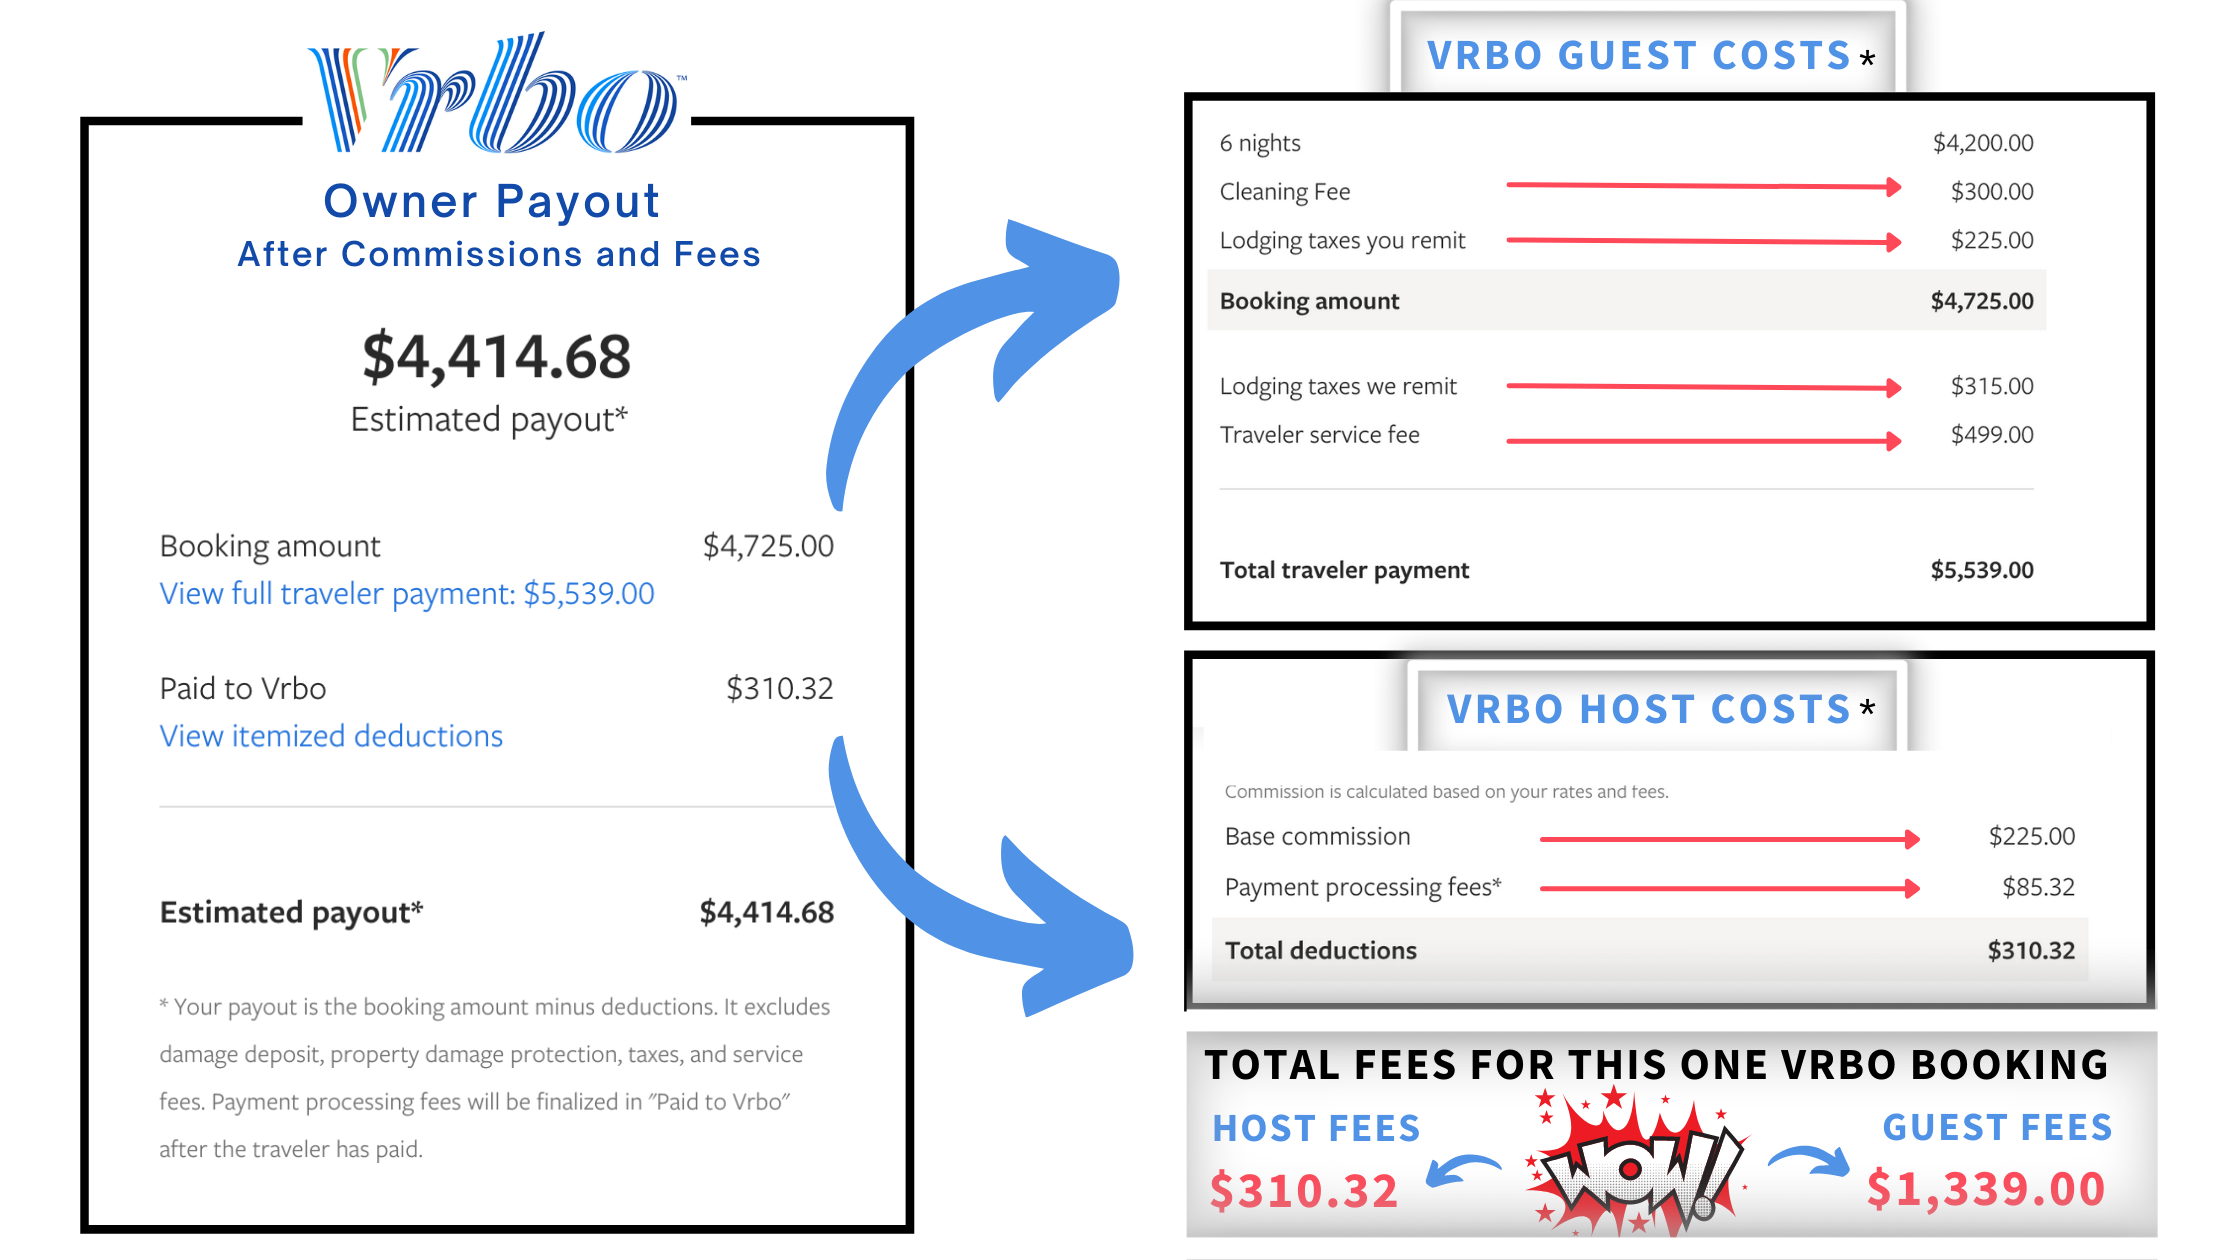 VRBO Host Taxes Fees and Commissions